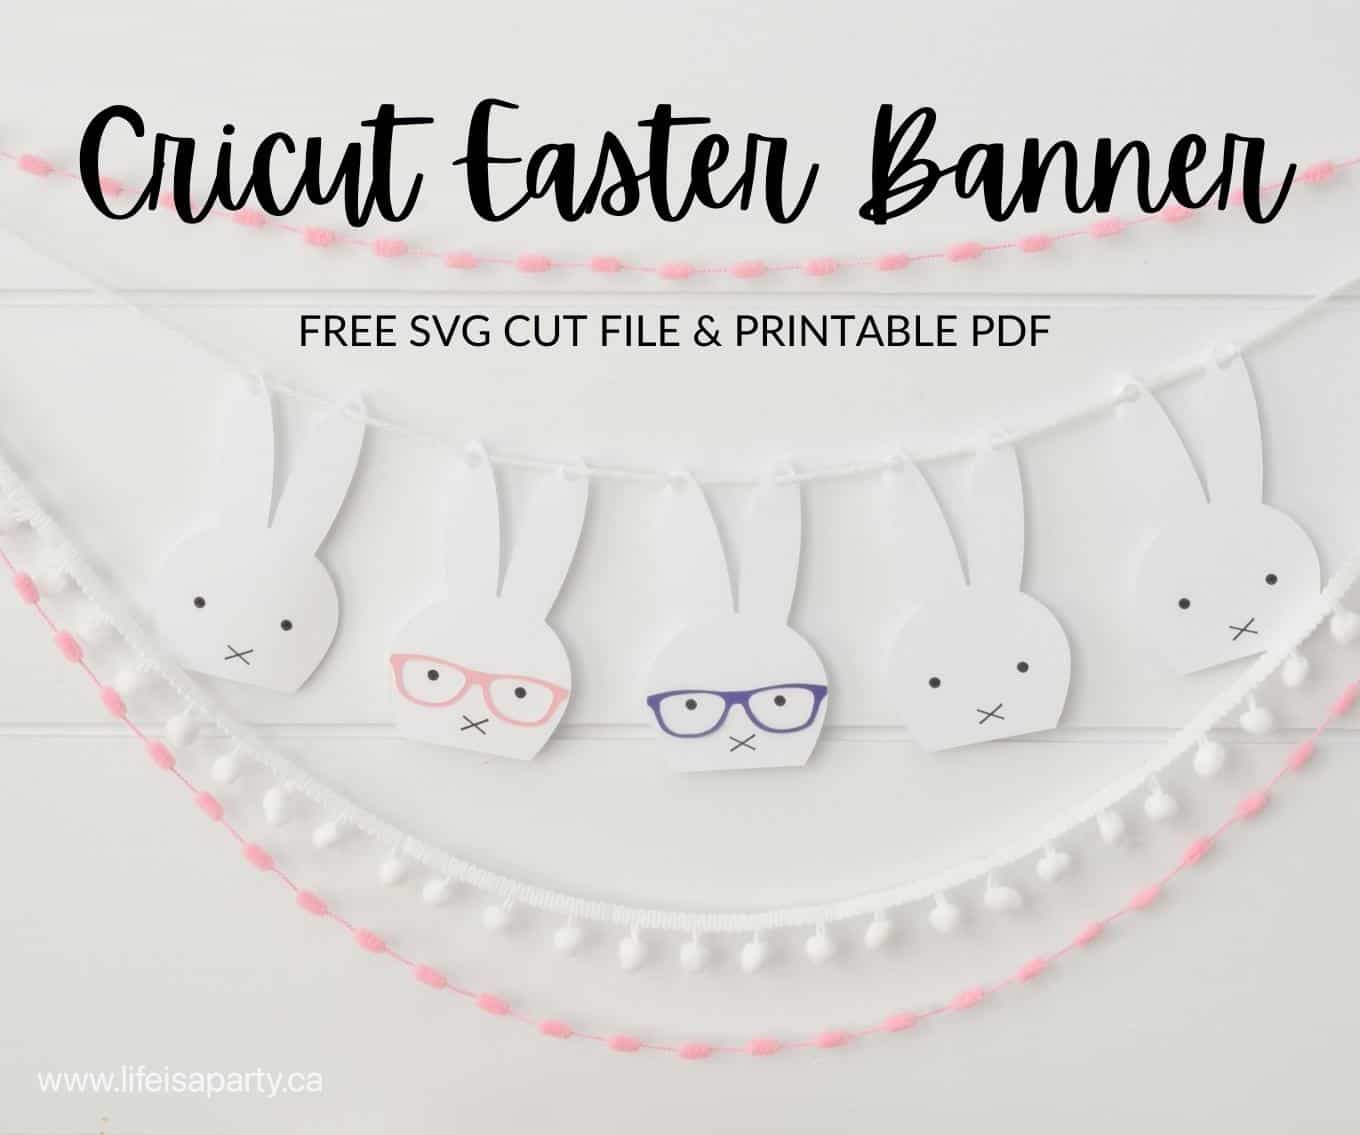 Cricut Easter Banner with Free Cut File